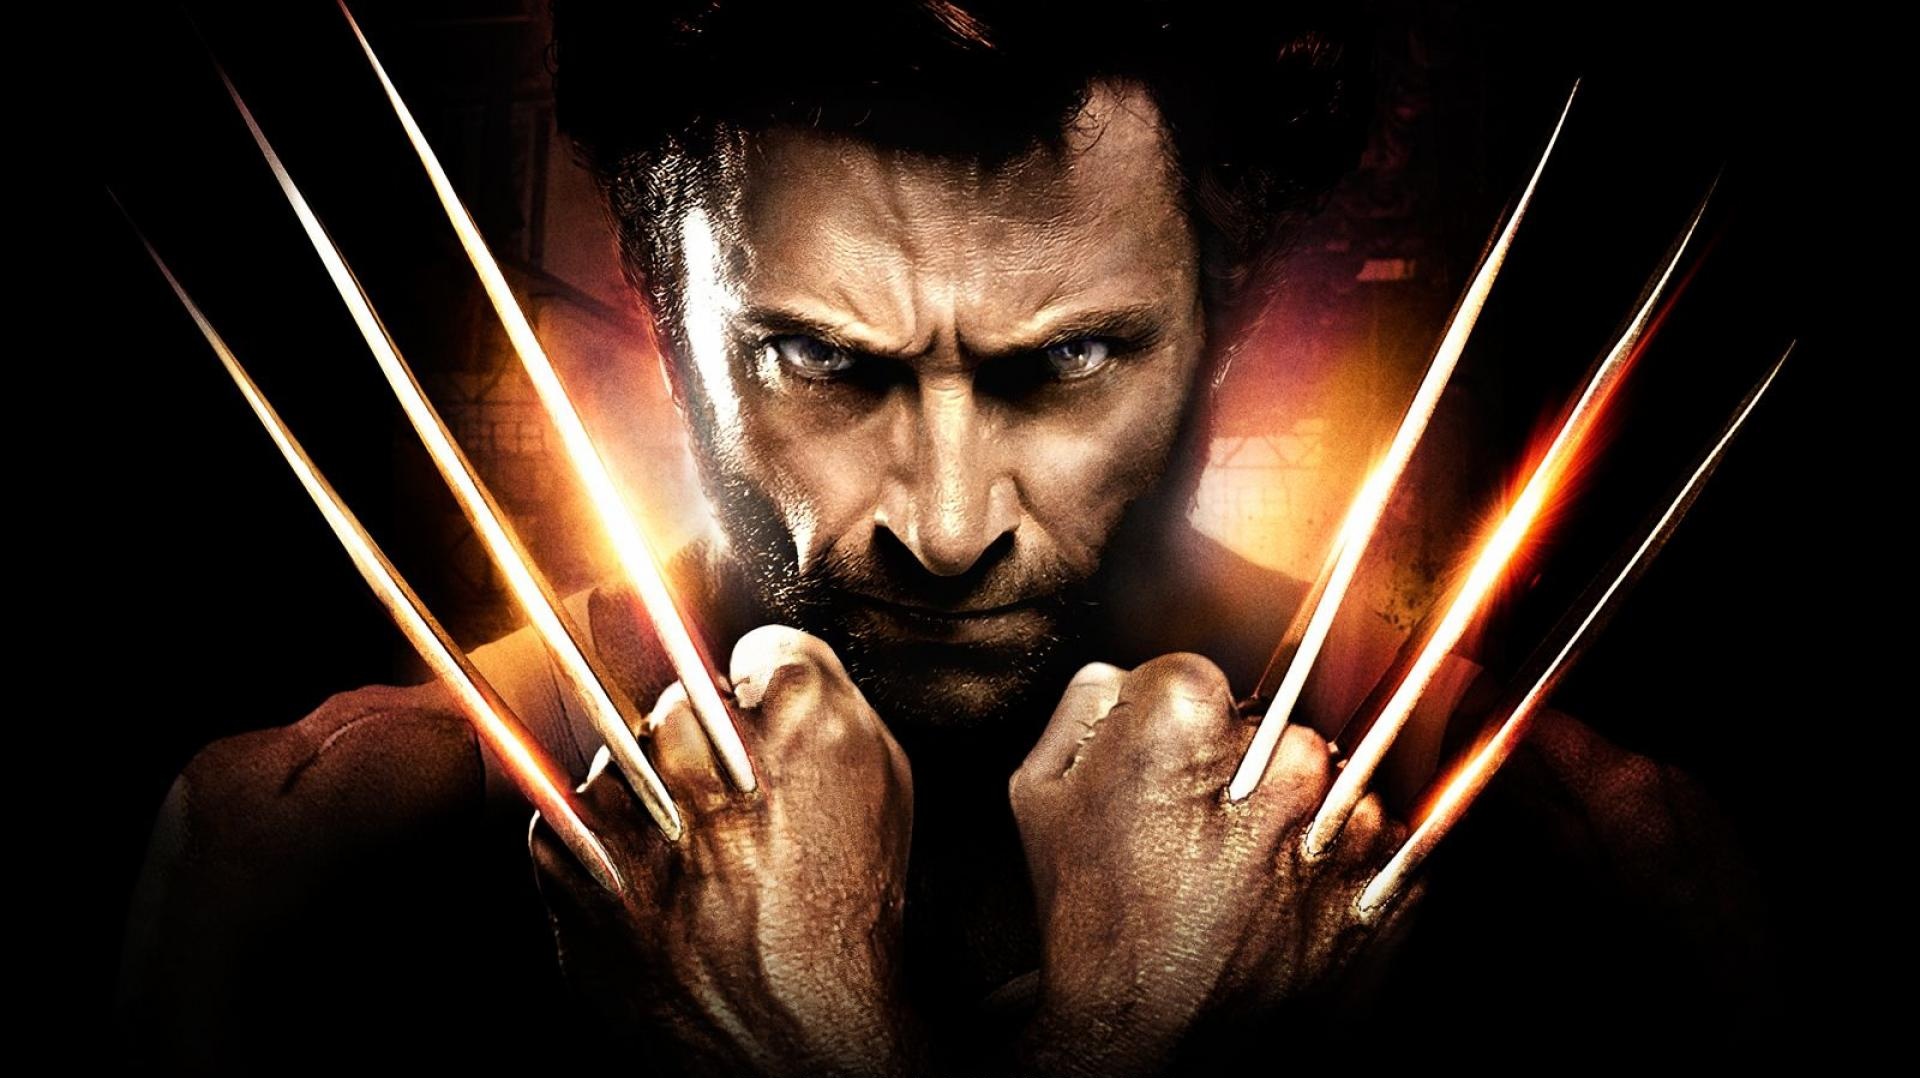 Box Office Report: The Wolverine claws its way to a big opening